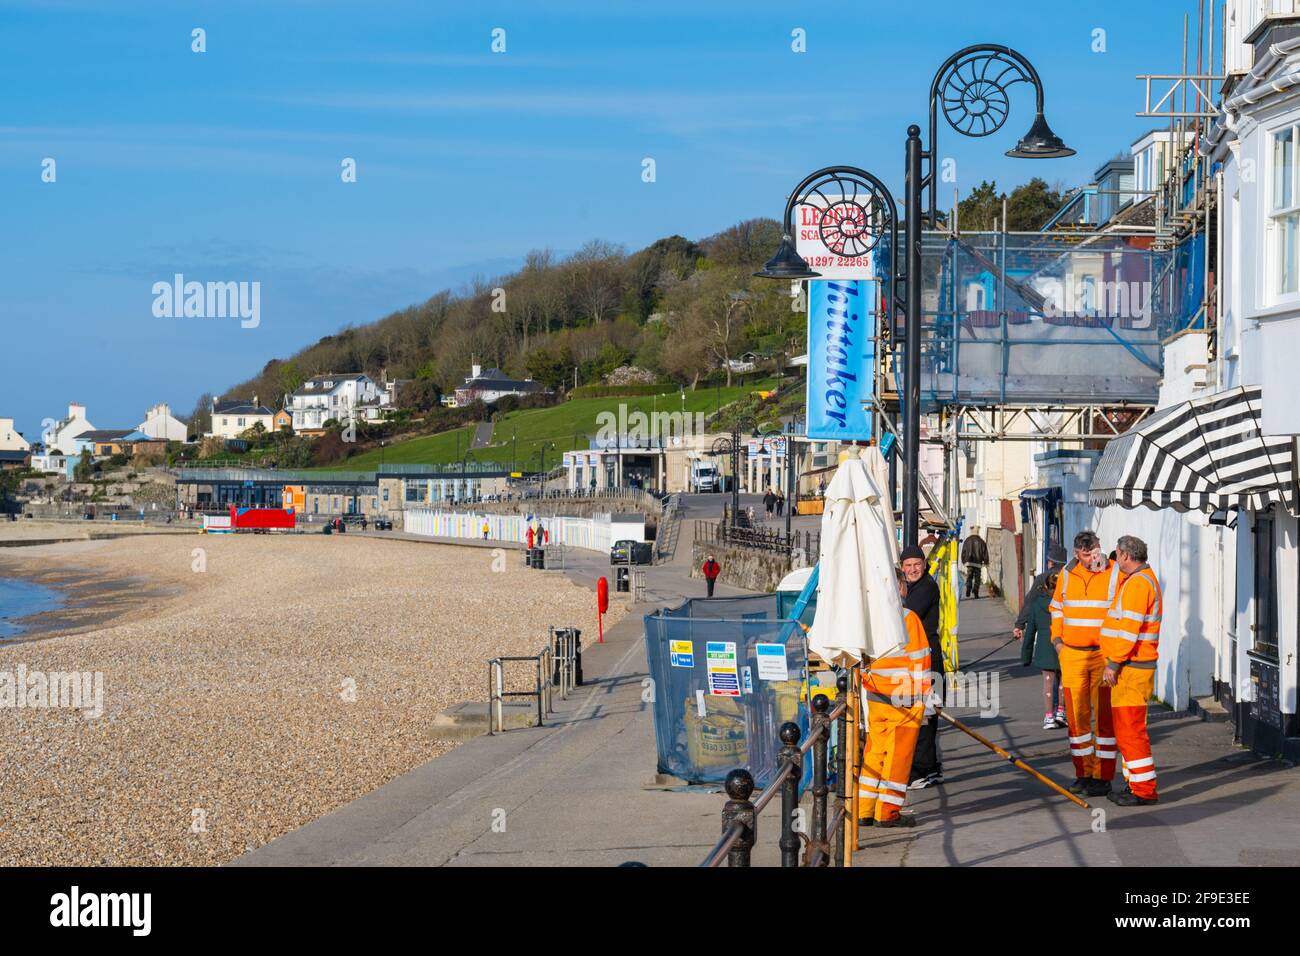 Lyme Regis, Dorset, UK. 18th Apr, 2021. UK Weather. A lovely warm and sunny start to the day at the seaside resort of Lyme Regis. Council workers prepare for a busy day ahead of the crowds. Credit: Celia McMahon/Alamy Live News Stock Photo